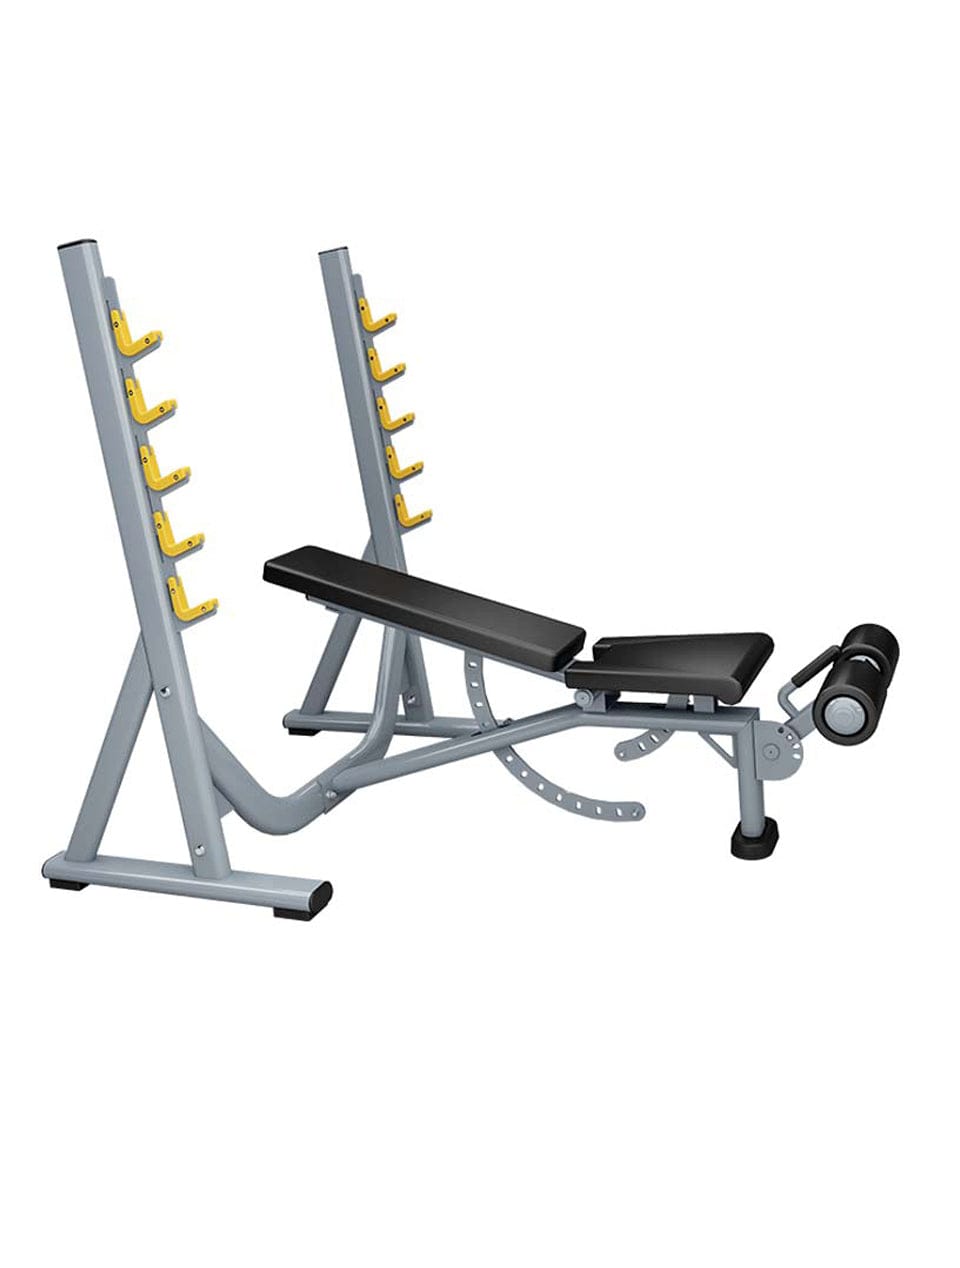 1441 Fitness Olympic Adjustable Bench with Barbell Support - 41FF46